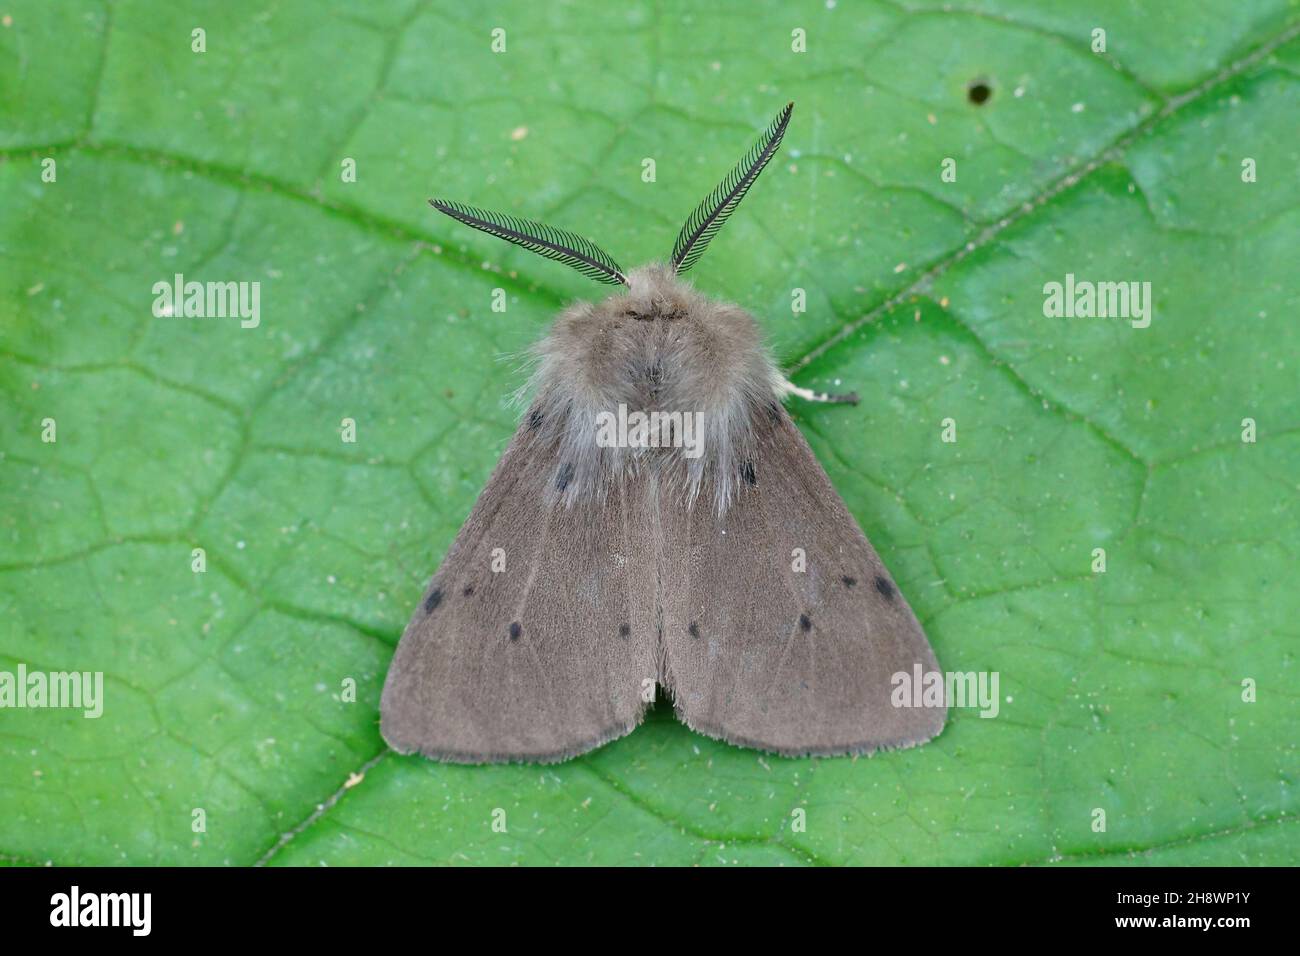 Dorsal closeup of the hairy and colorful muslin moth, Diapohra mendica Stock Photo